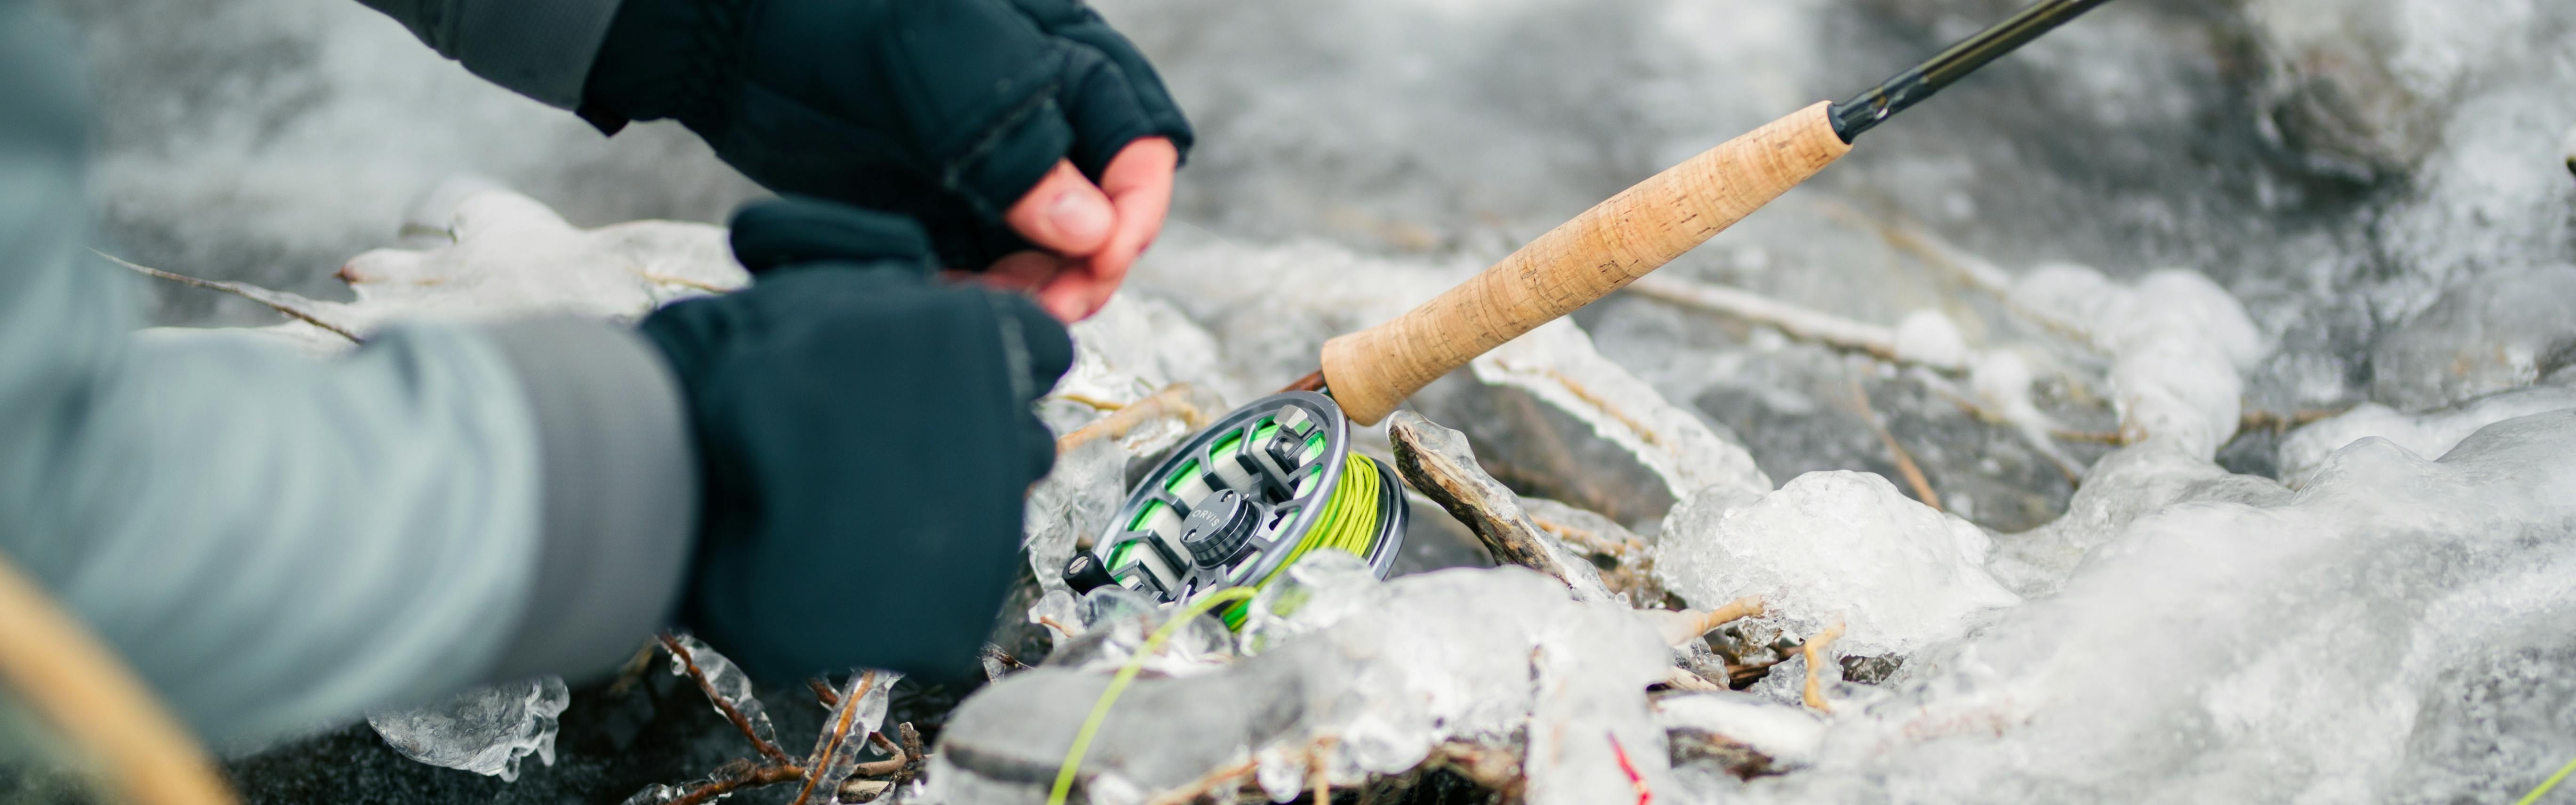 Someone handles line attached to an Orvis fly fishing reel while wearing mittens. The reel and rod are resting on ice.